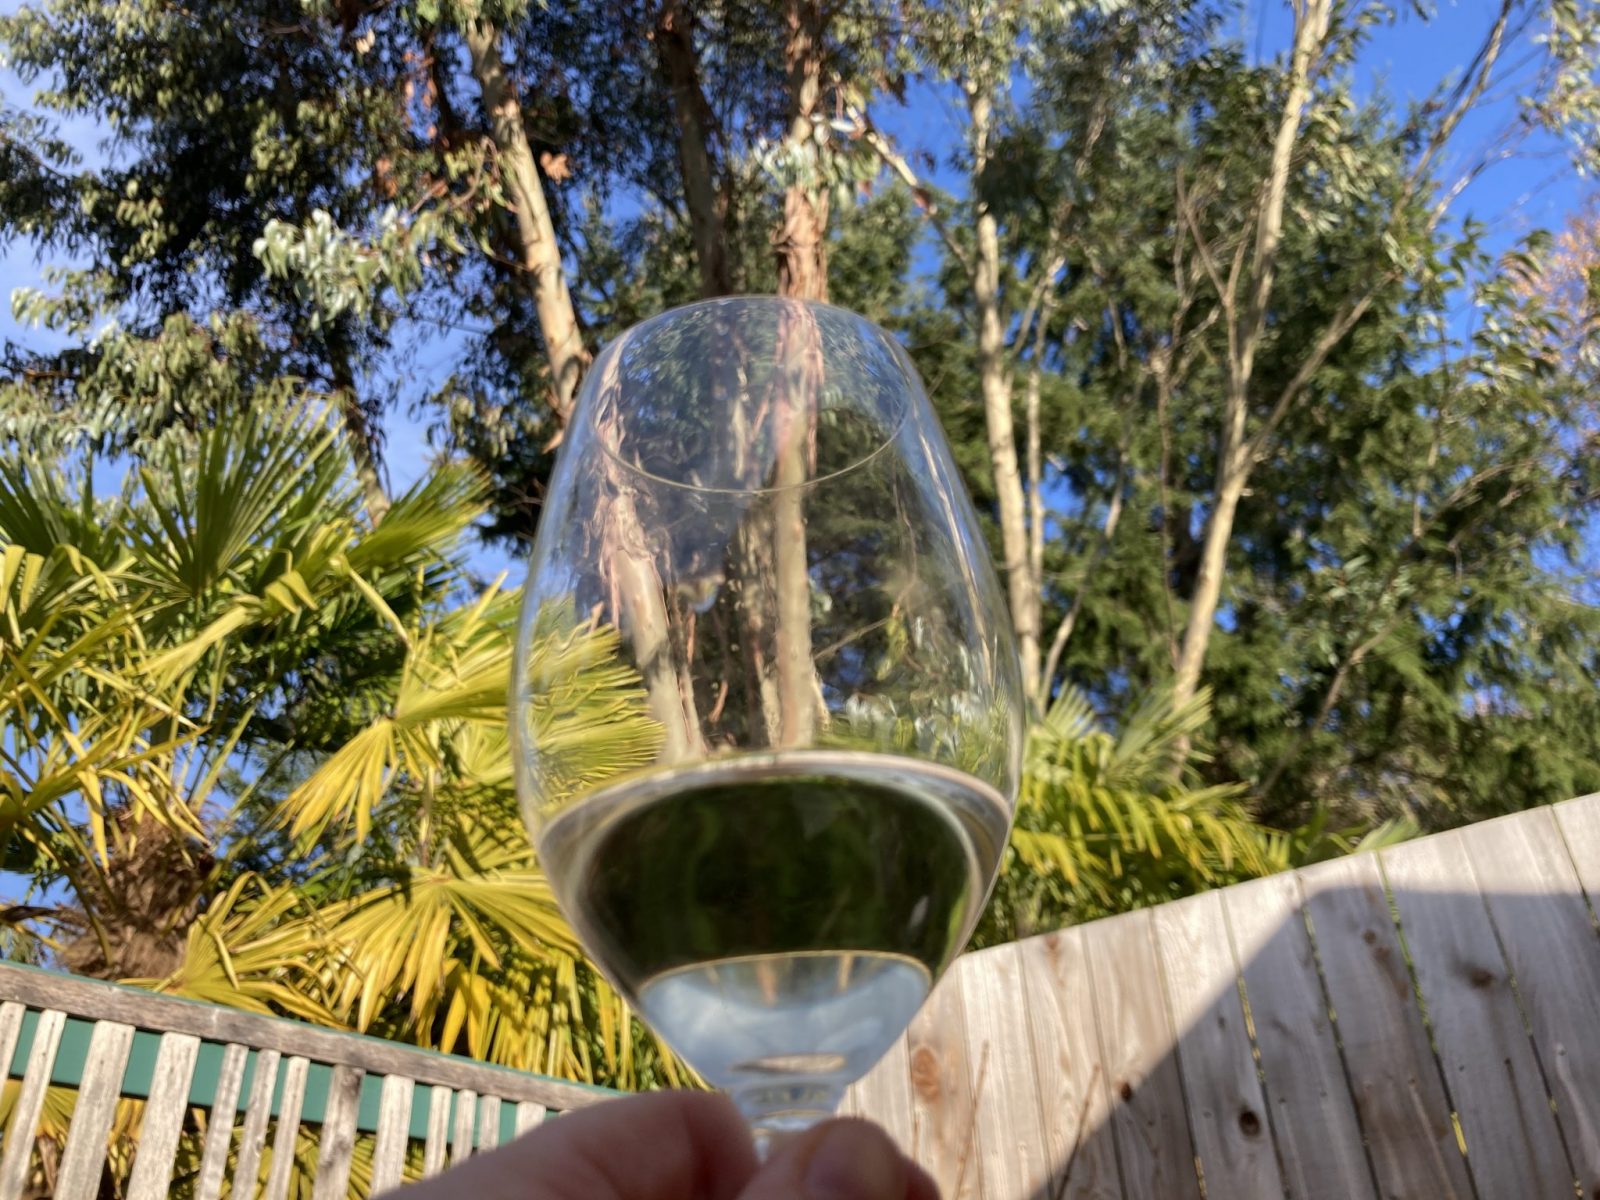 A close up of a wine glass with white wine in it. It is surrounded by a wooden fence and there are evergreen and palm trees in the background